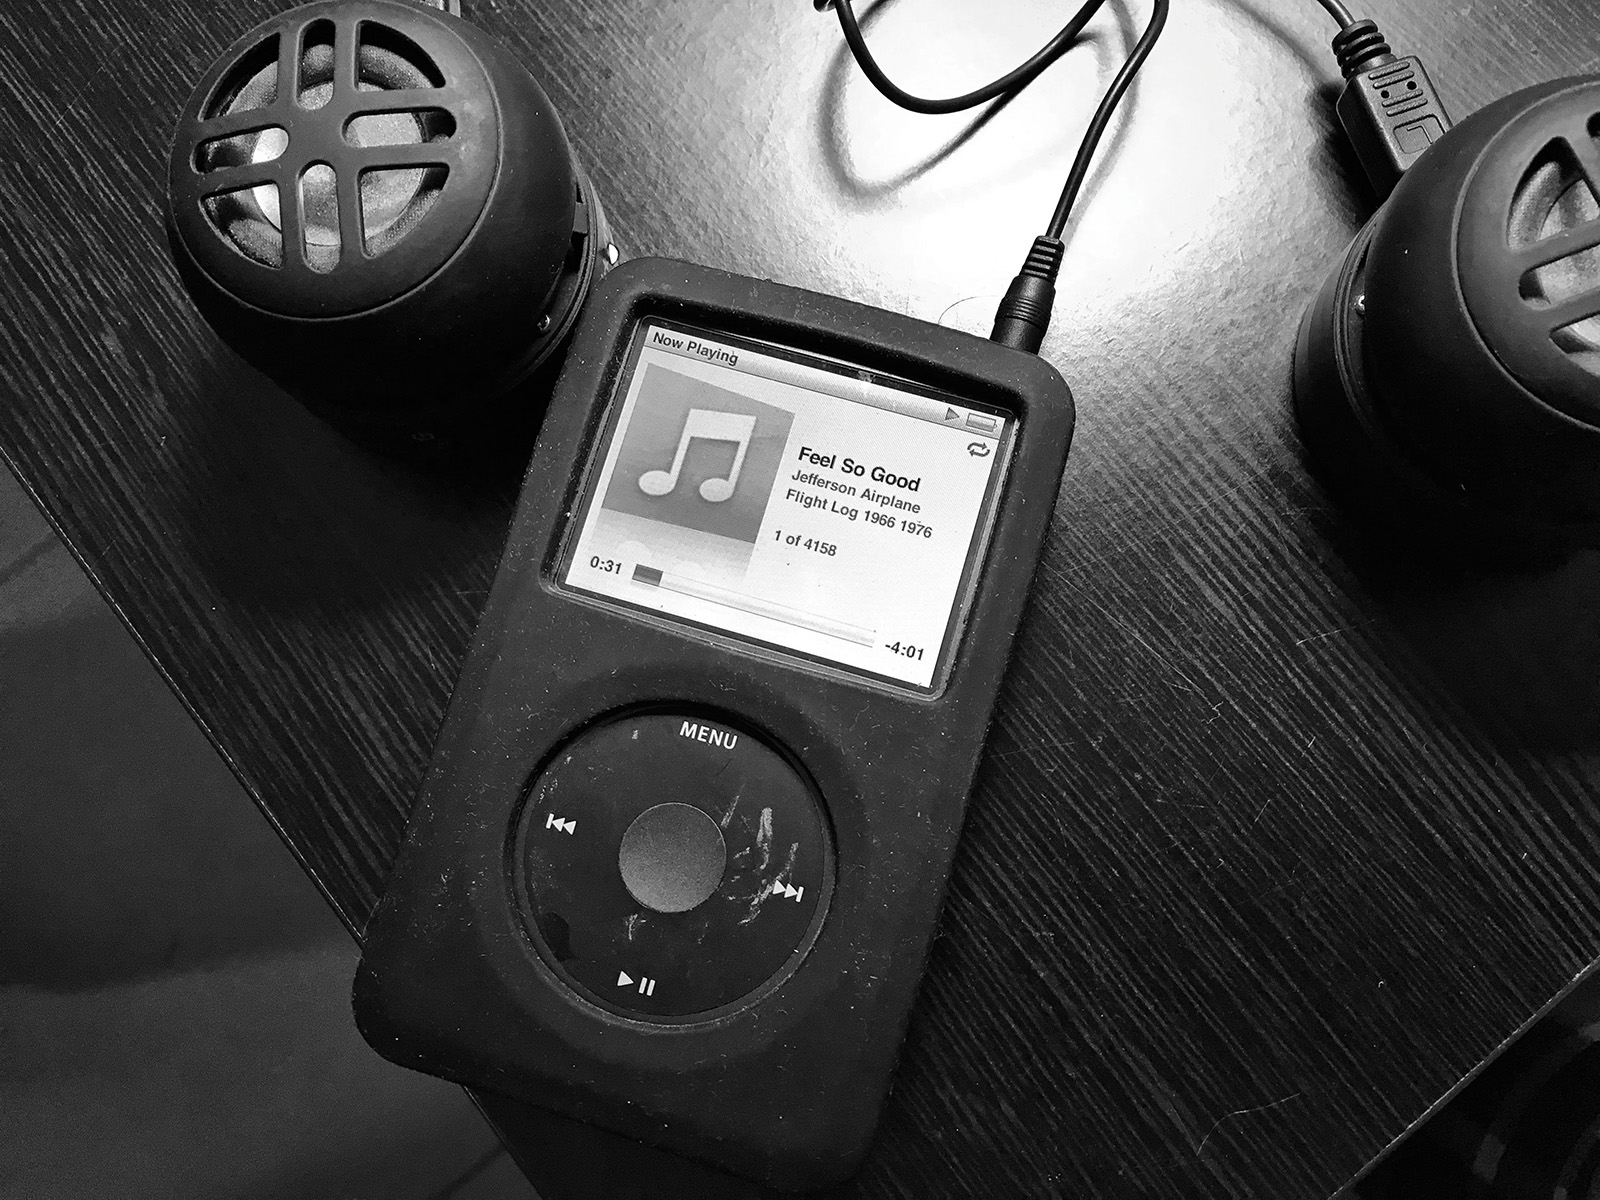 2016/366/32 More Music on the iPod Does Feel So Good